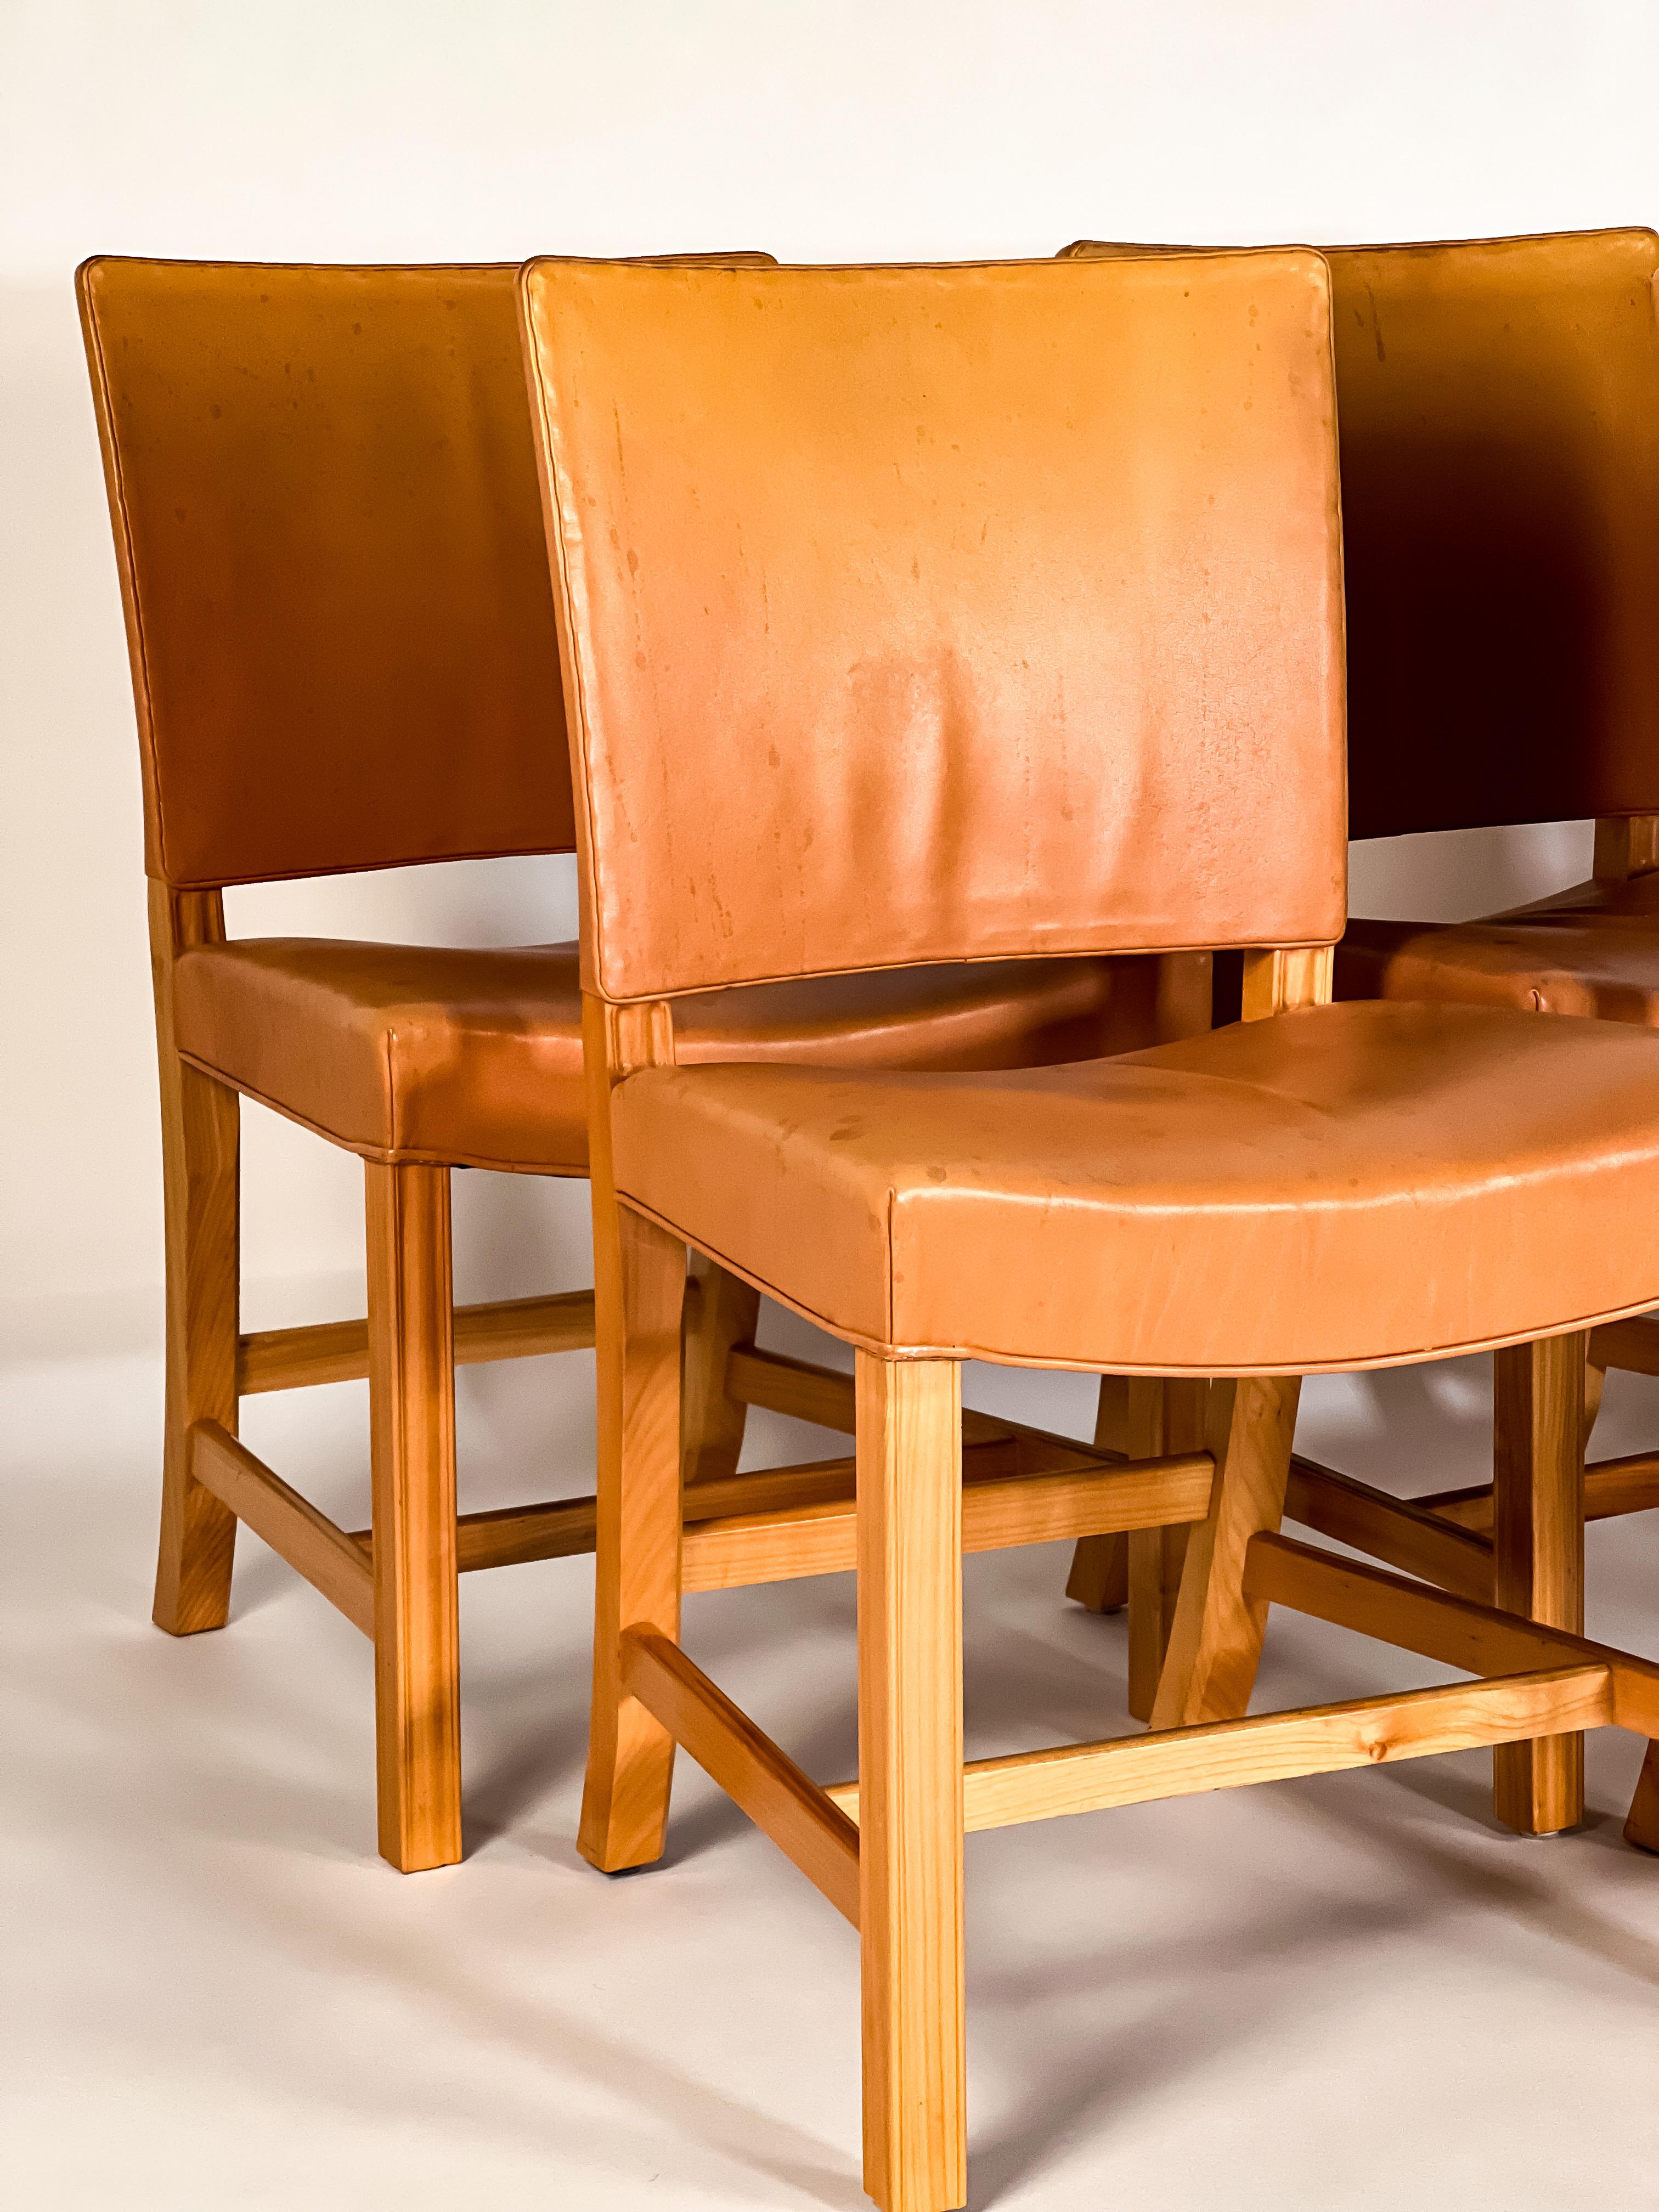 Six ultra-classic “Red” chairs by Kaare Klint for Rud Rasmussen, Denmark. Vegetable tanned full grain leather upholstery has a wonderful patina. The frames appear to be Elm. Excellent vintage condition. Acquired directly from Danish auction house